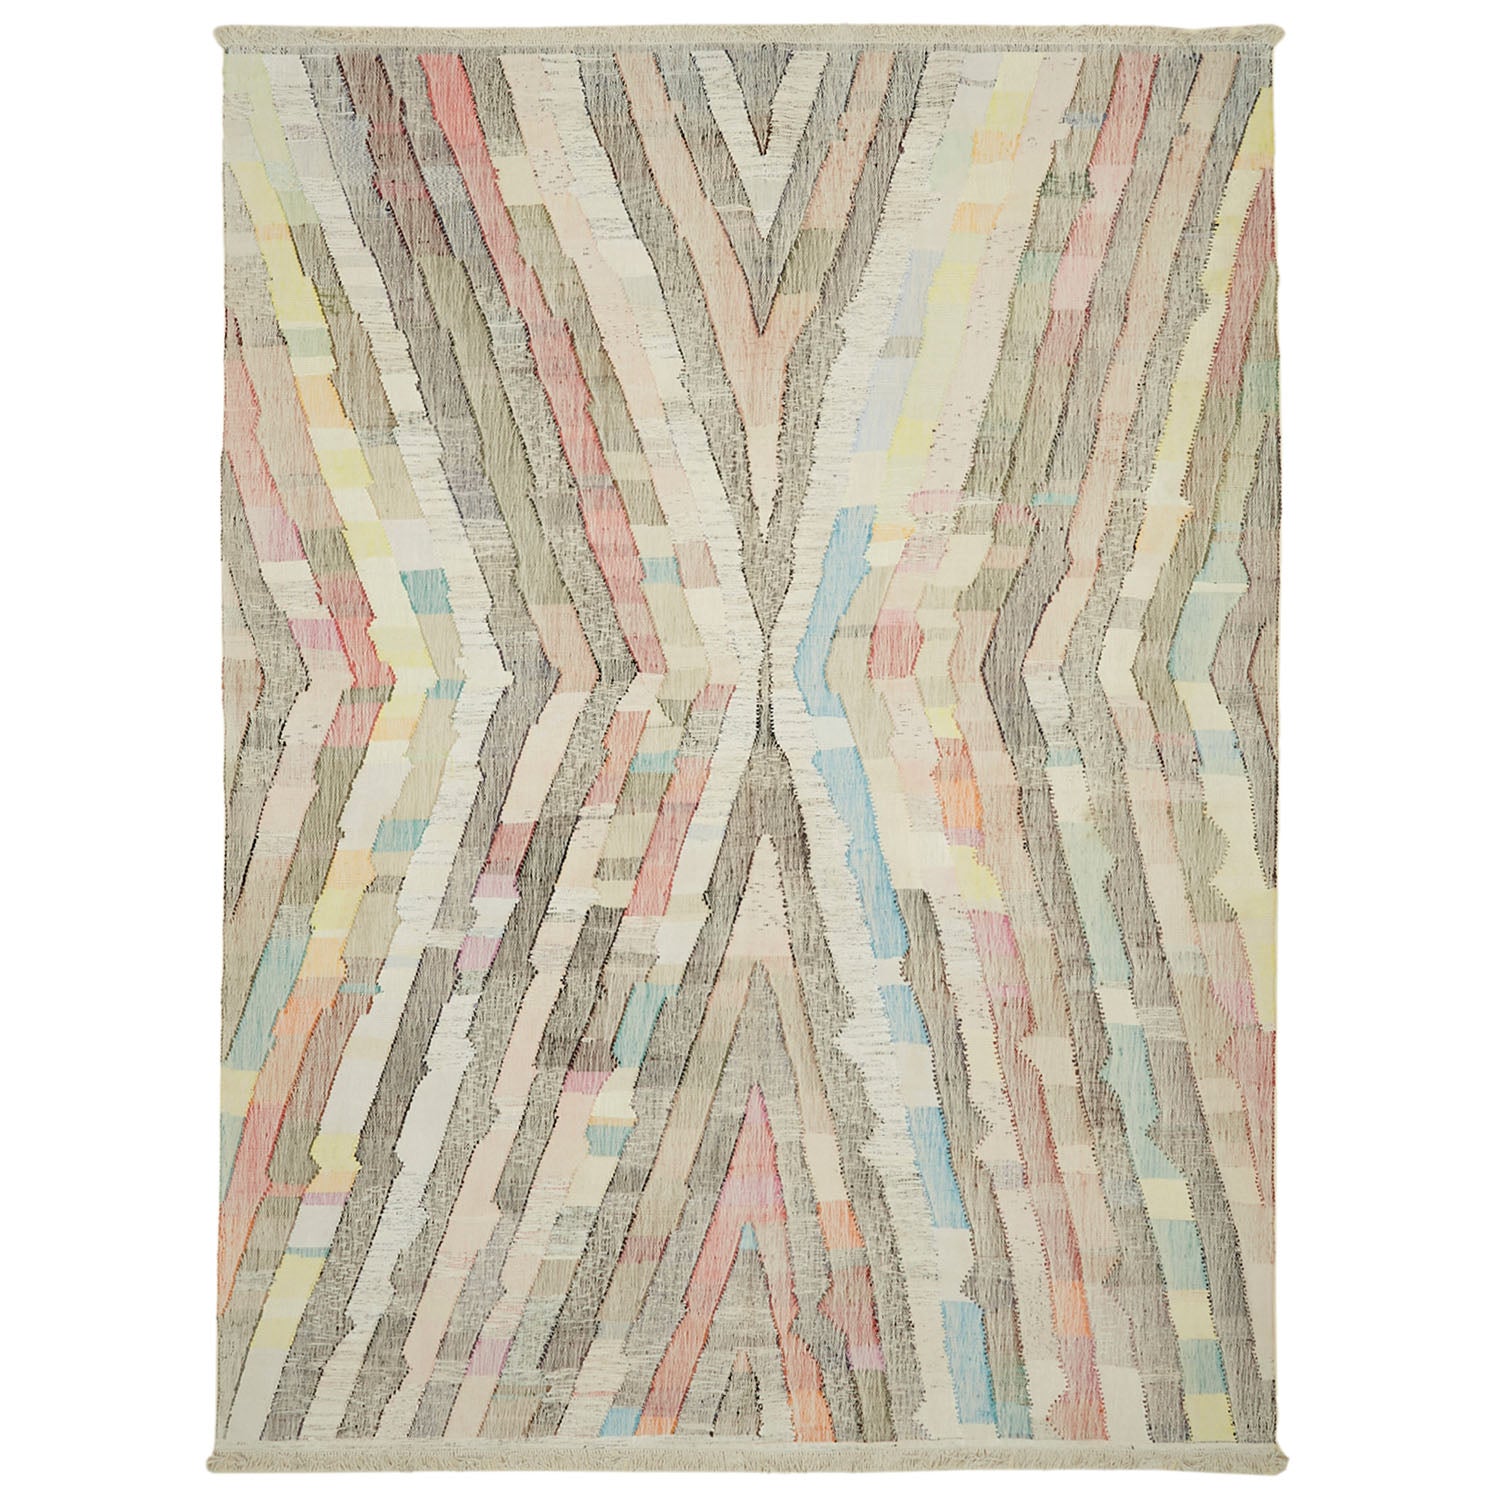 Abstract hand-woven rug with pastel geometric patterns and fringed edges.